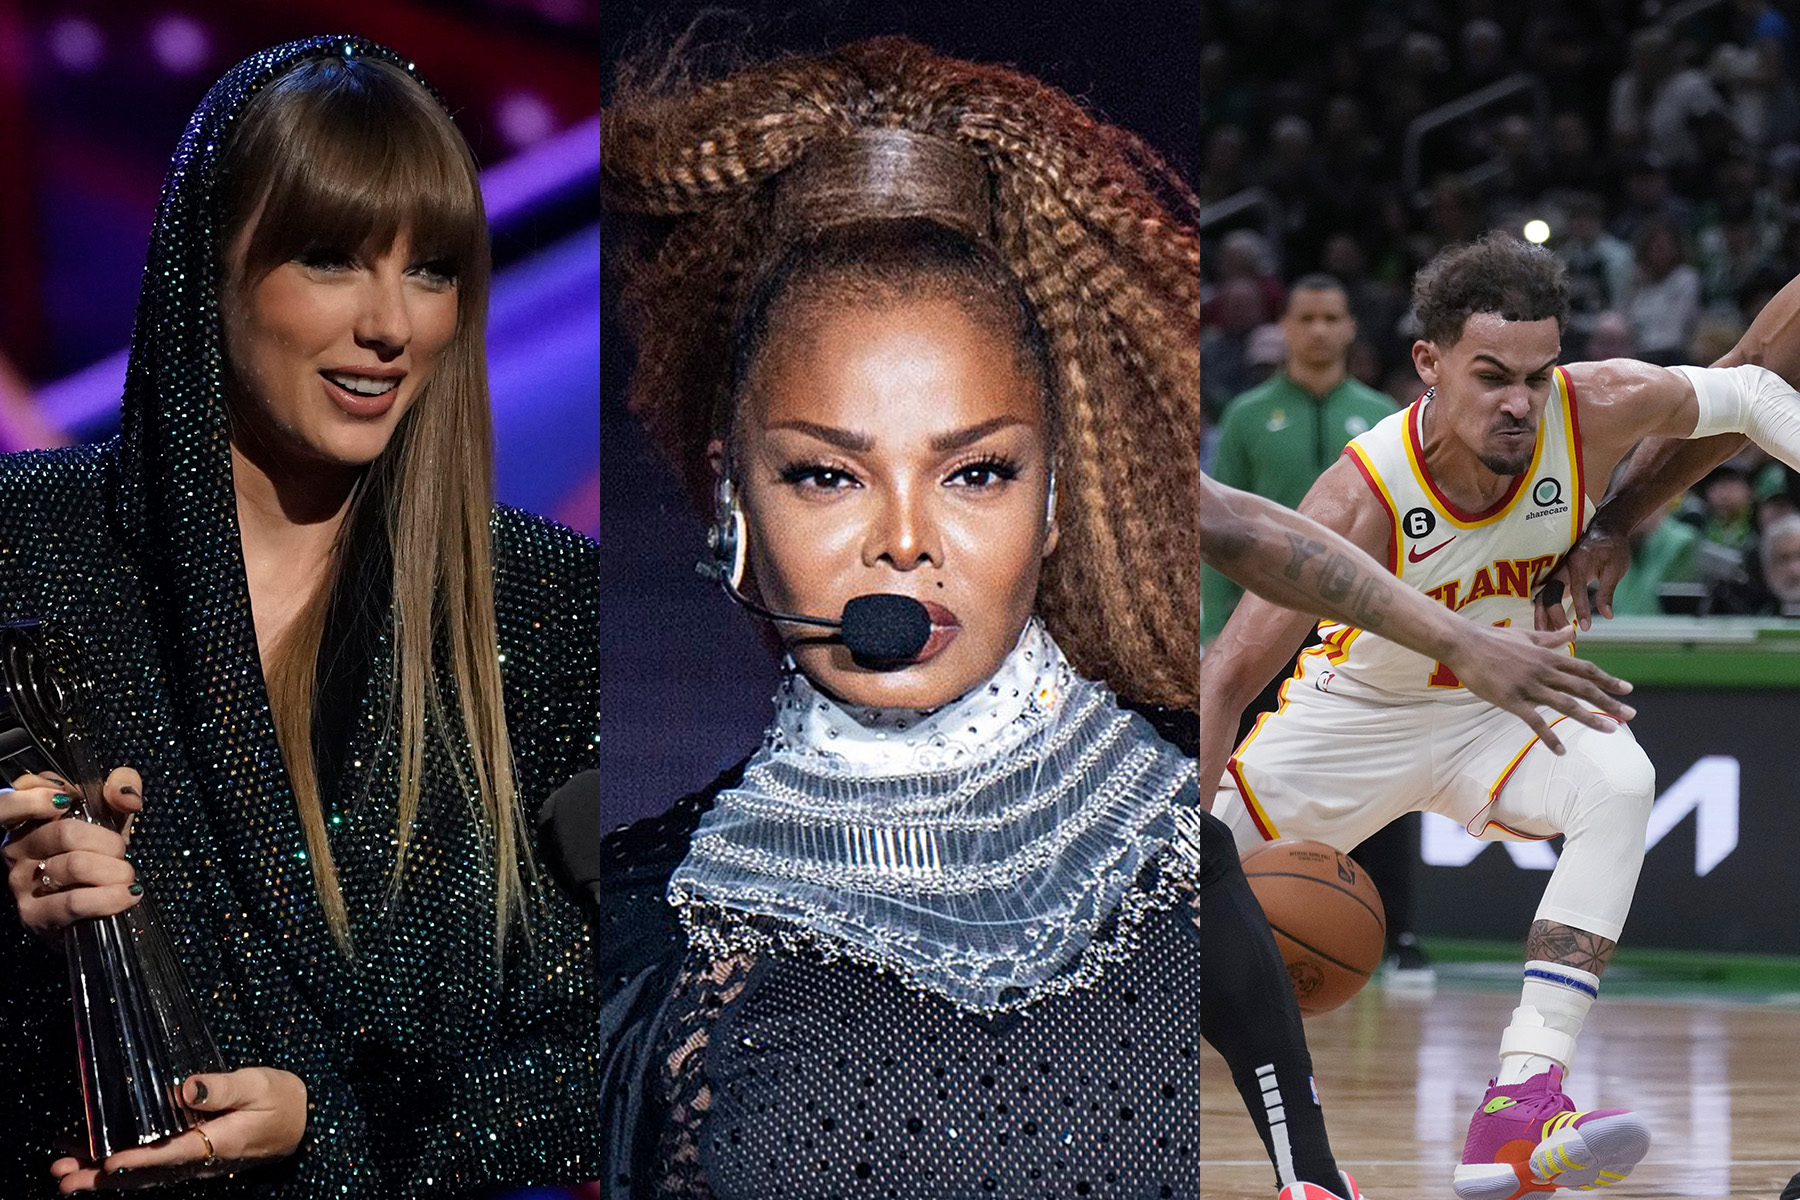 Downlad Hanet Jackson Sex - Hawks playoff win forces Janet Jackson's Thursday concert to move to Friday